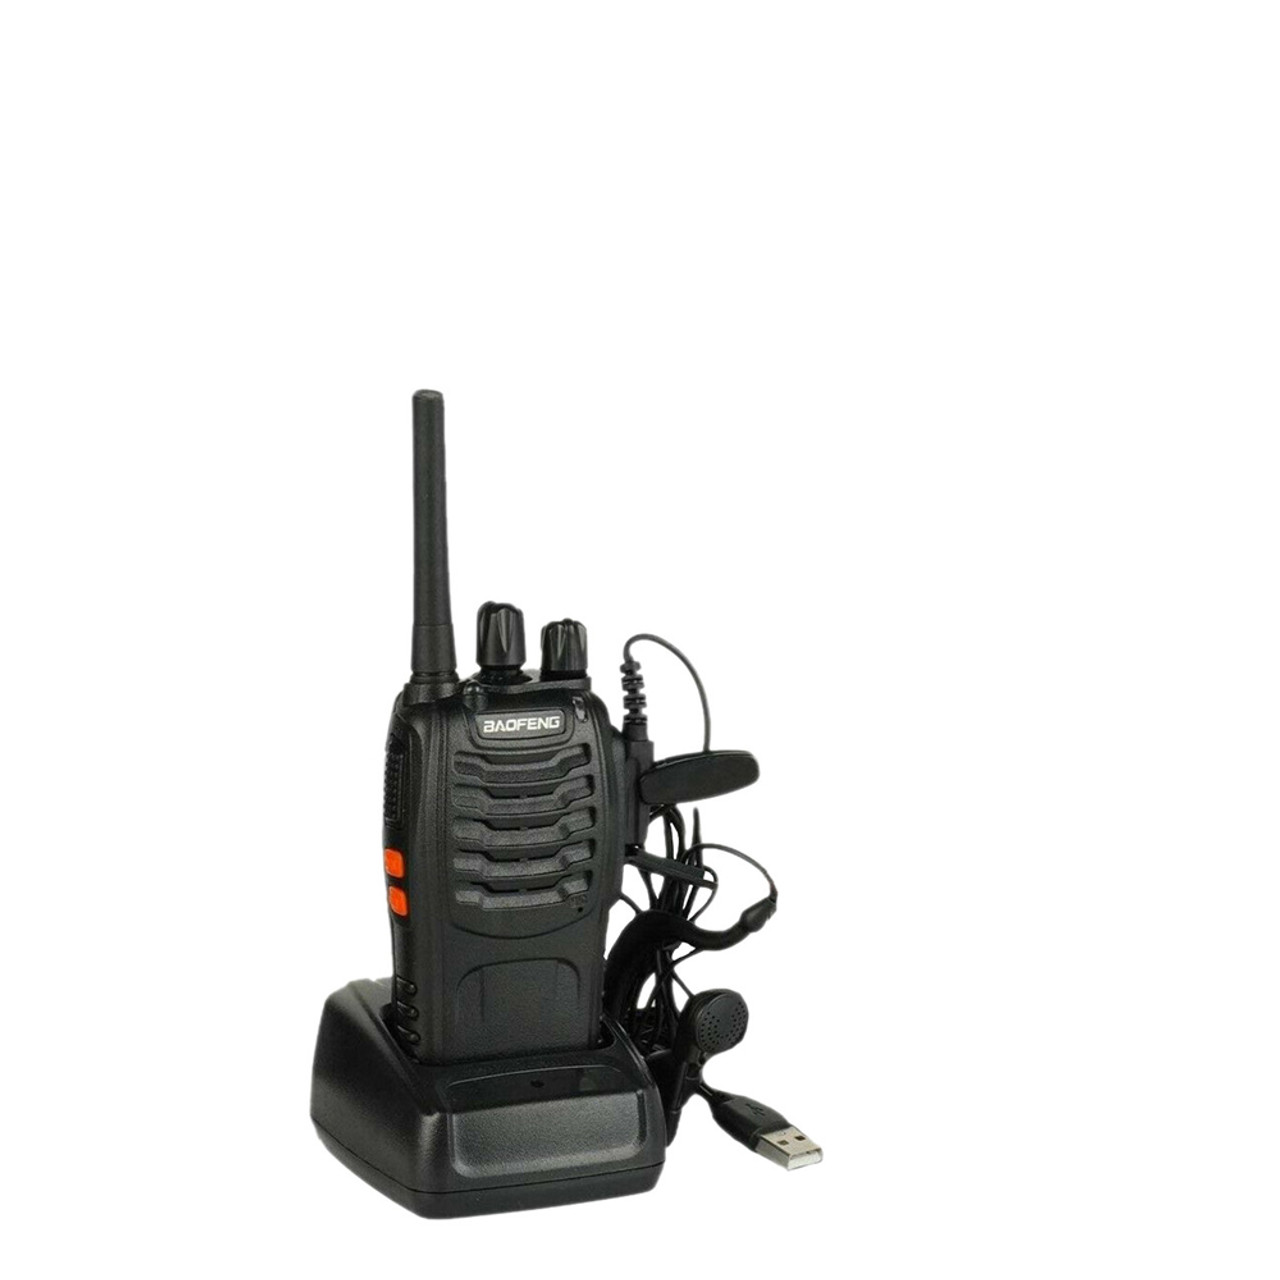 BAOFENG BF-88A Walkie Talkies Way Charger Bulk FRS Radio License-Free  Long Range 16 Channels Two Way Radio Pack of